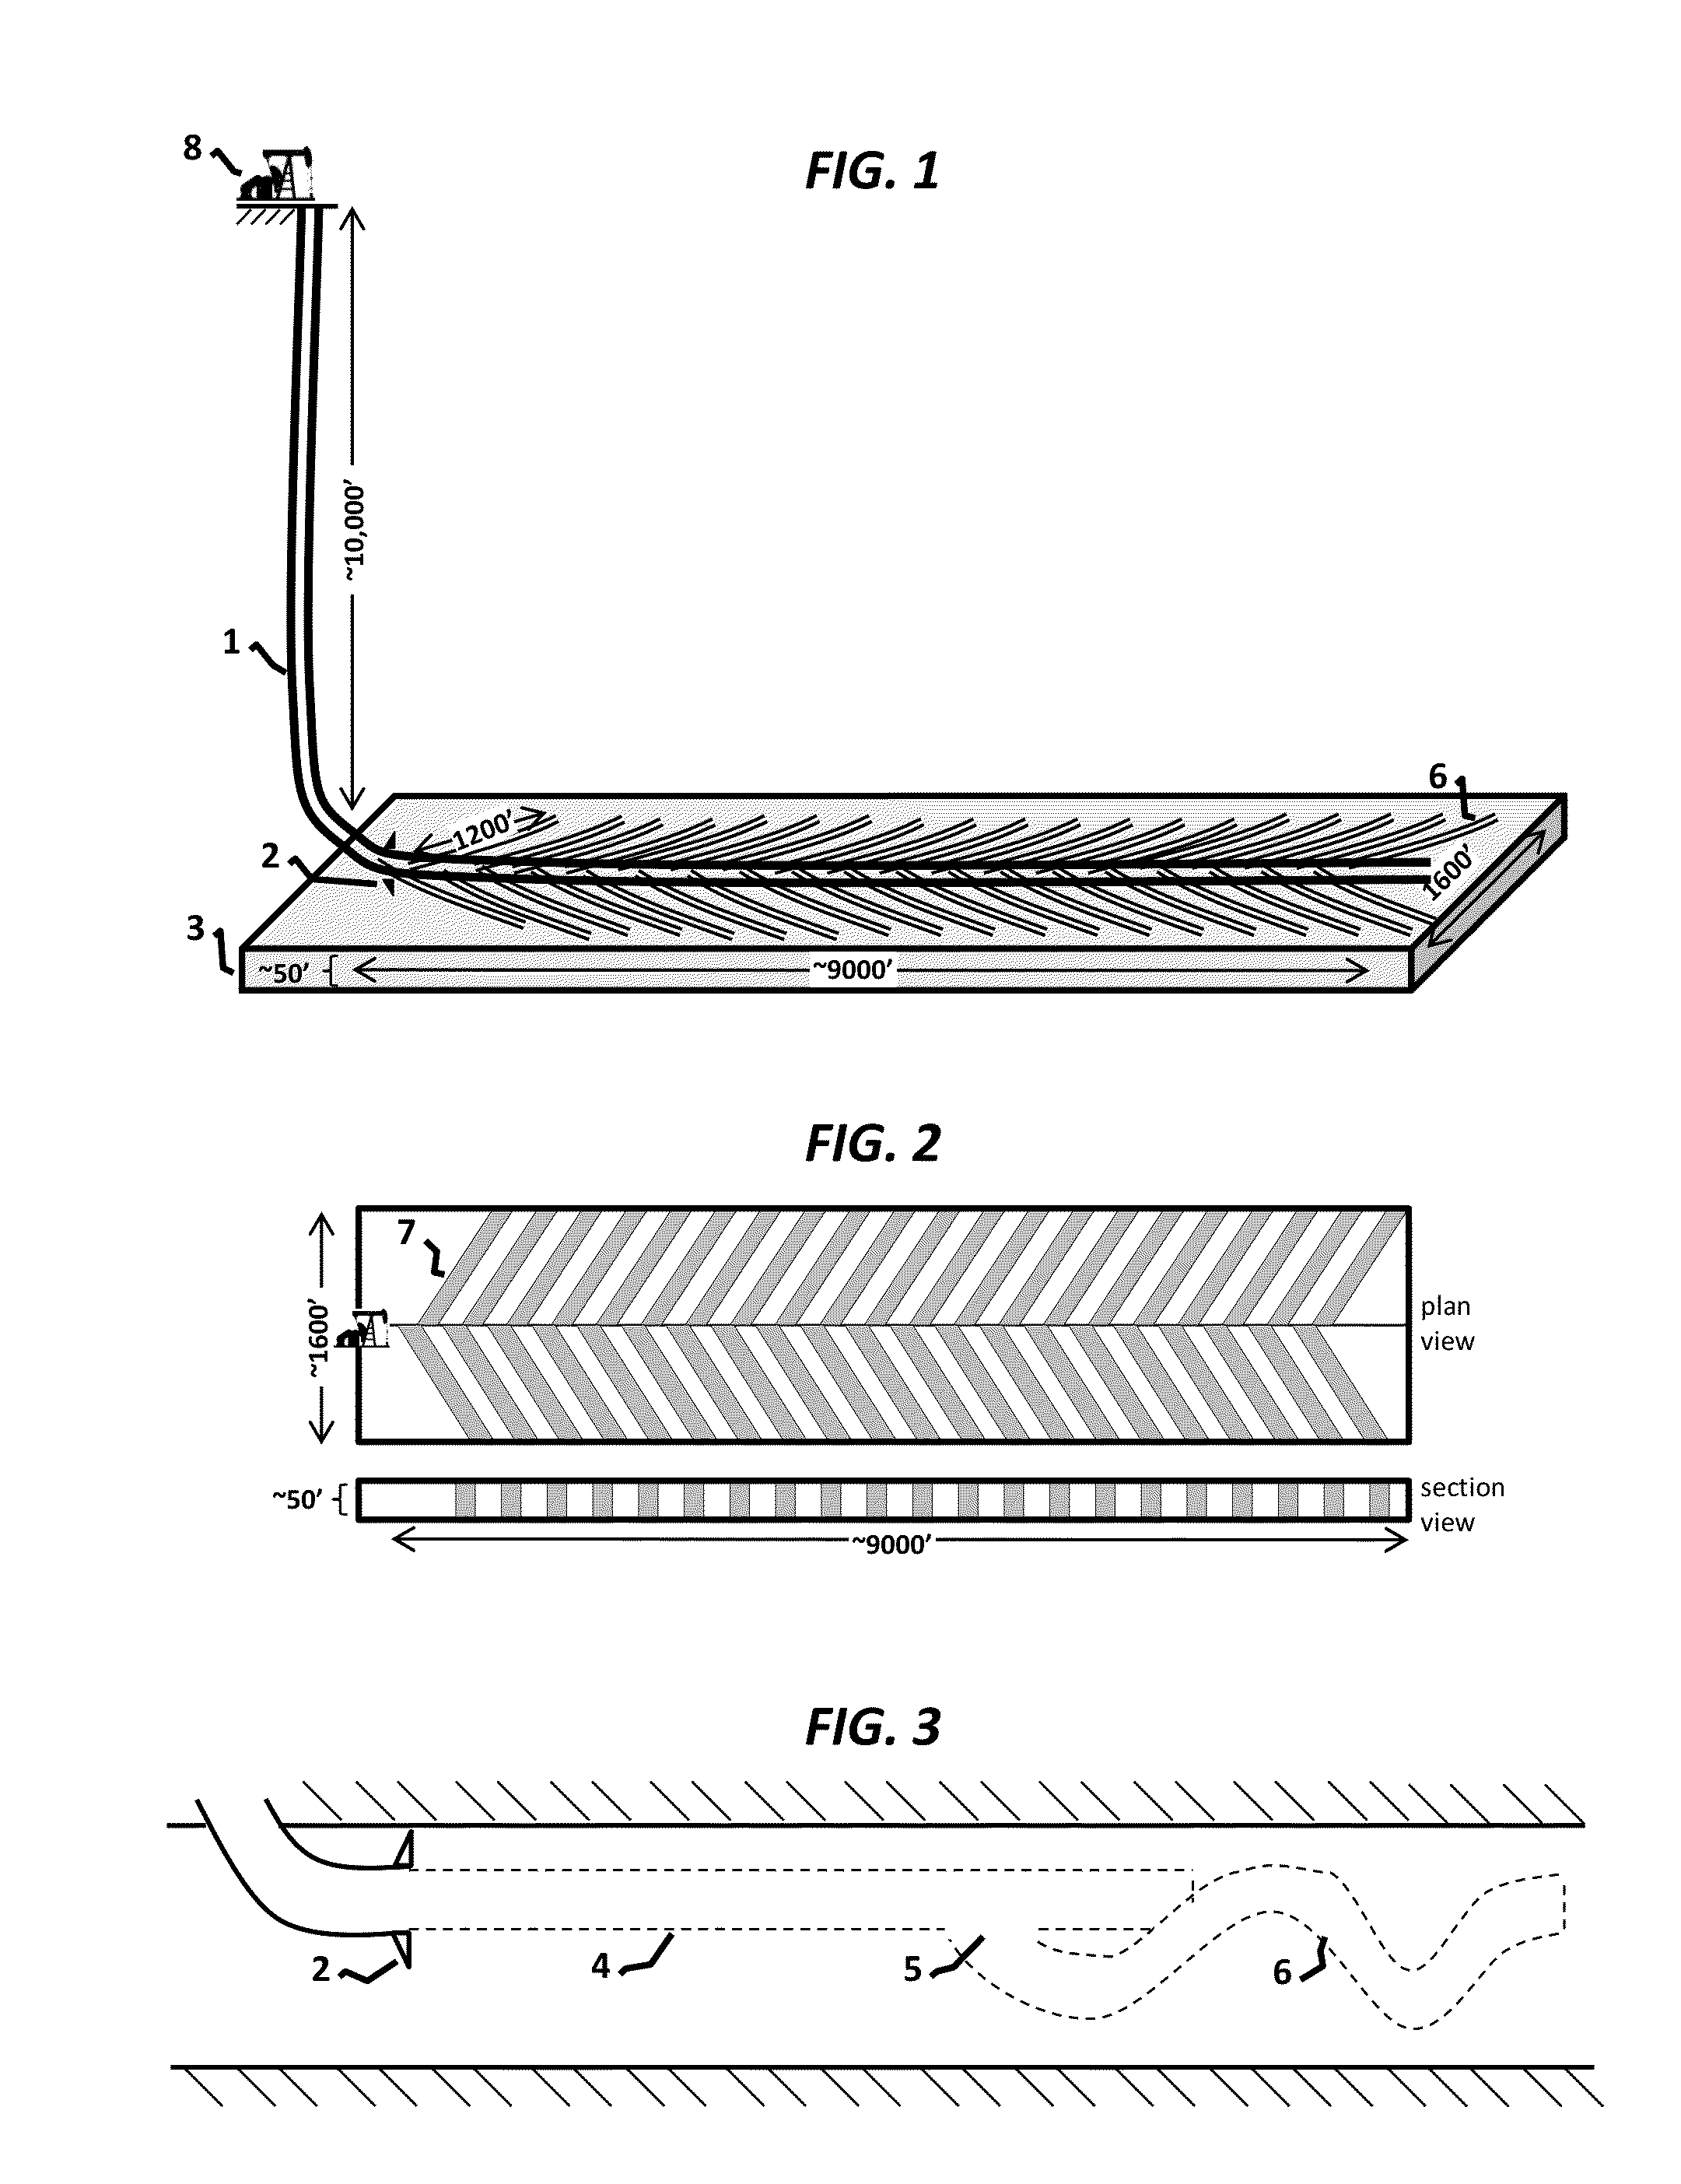 System for developing high pressure shale or tight rock formations using a profusion of open hole sinusoidal laterals